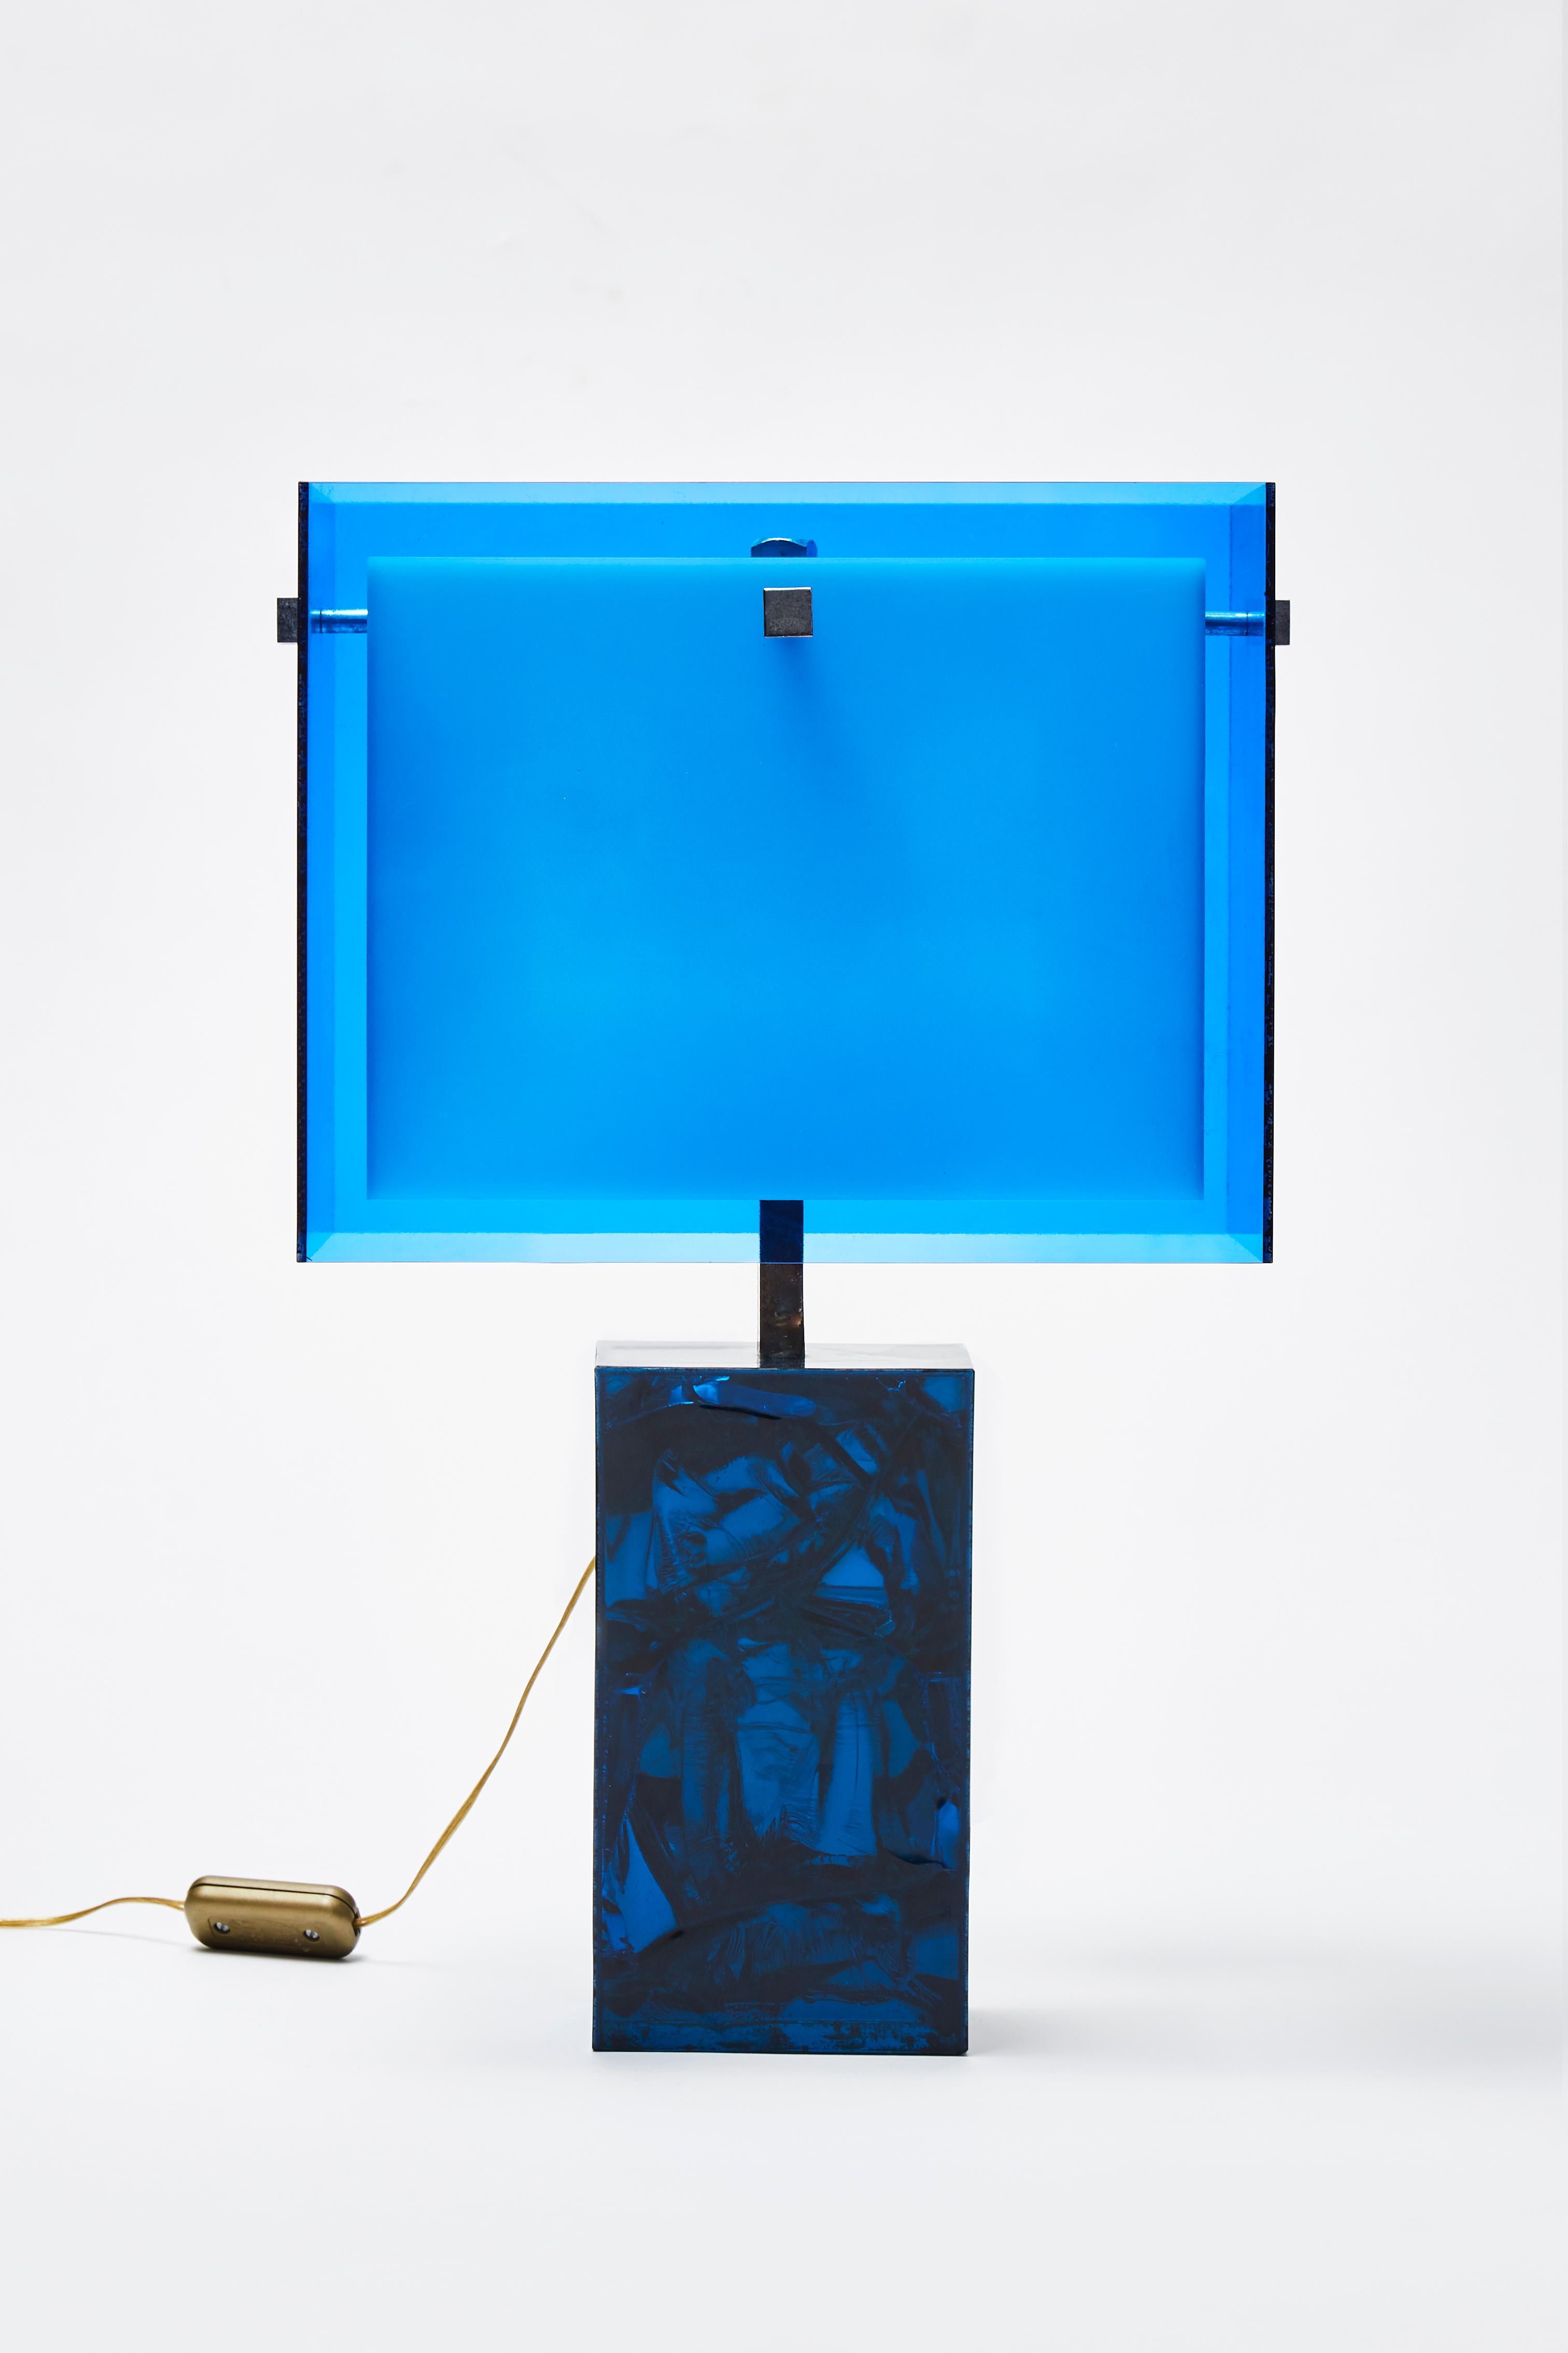 Small rectangular table lamp made of blue fractale resin by Marie Claude de Fouquieres. Original matching double shade in blue and white plexiglass.